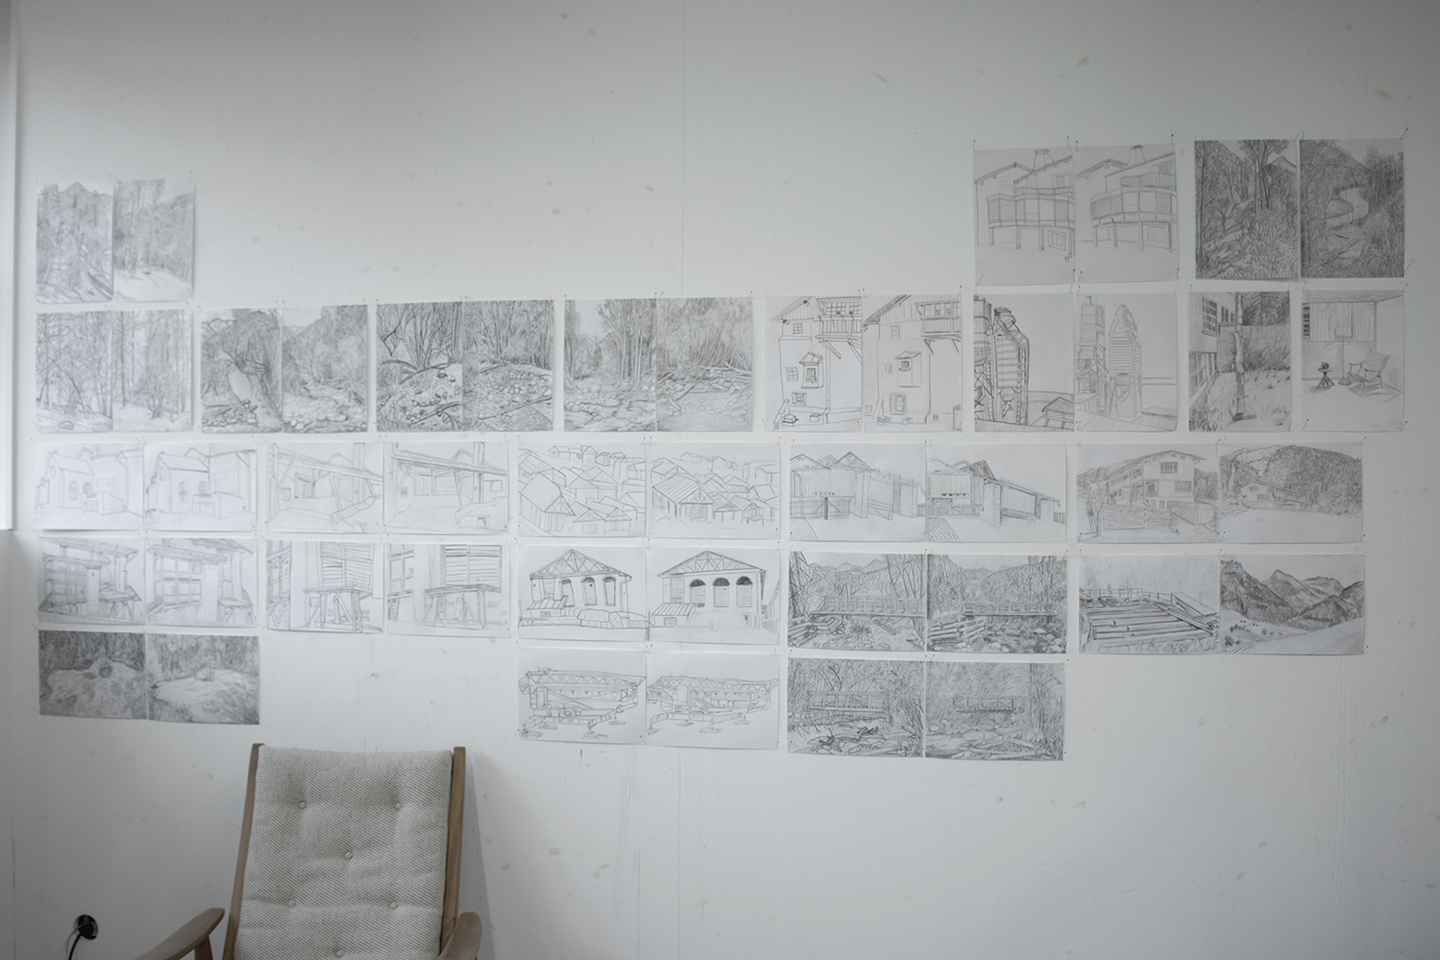 Studio-view with Drawings